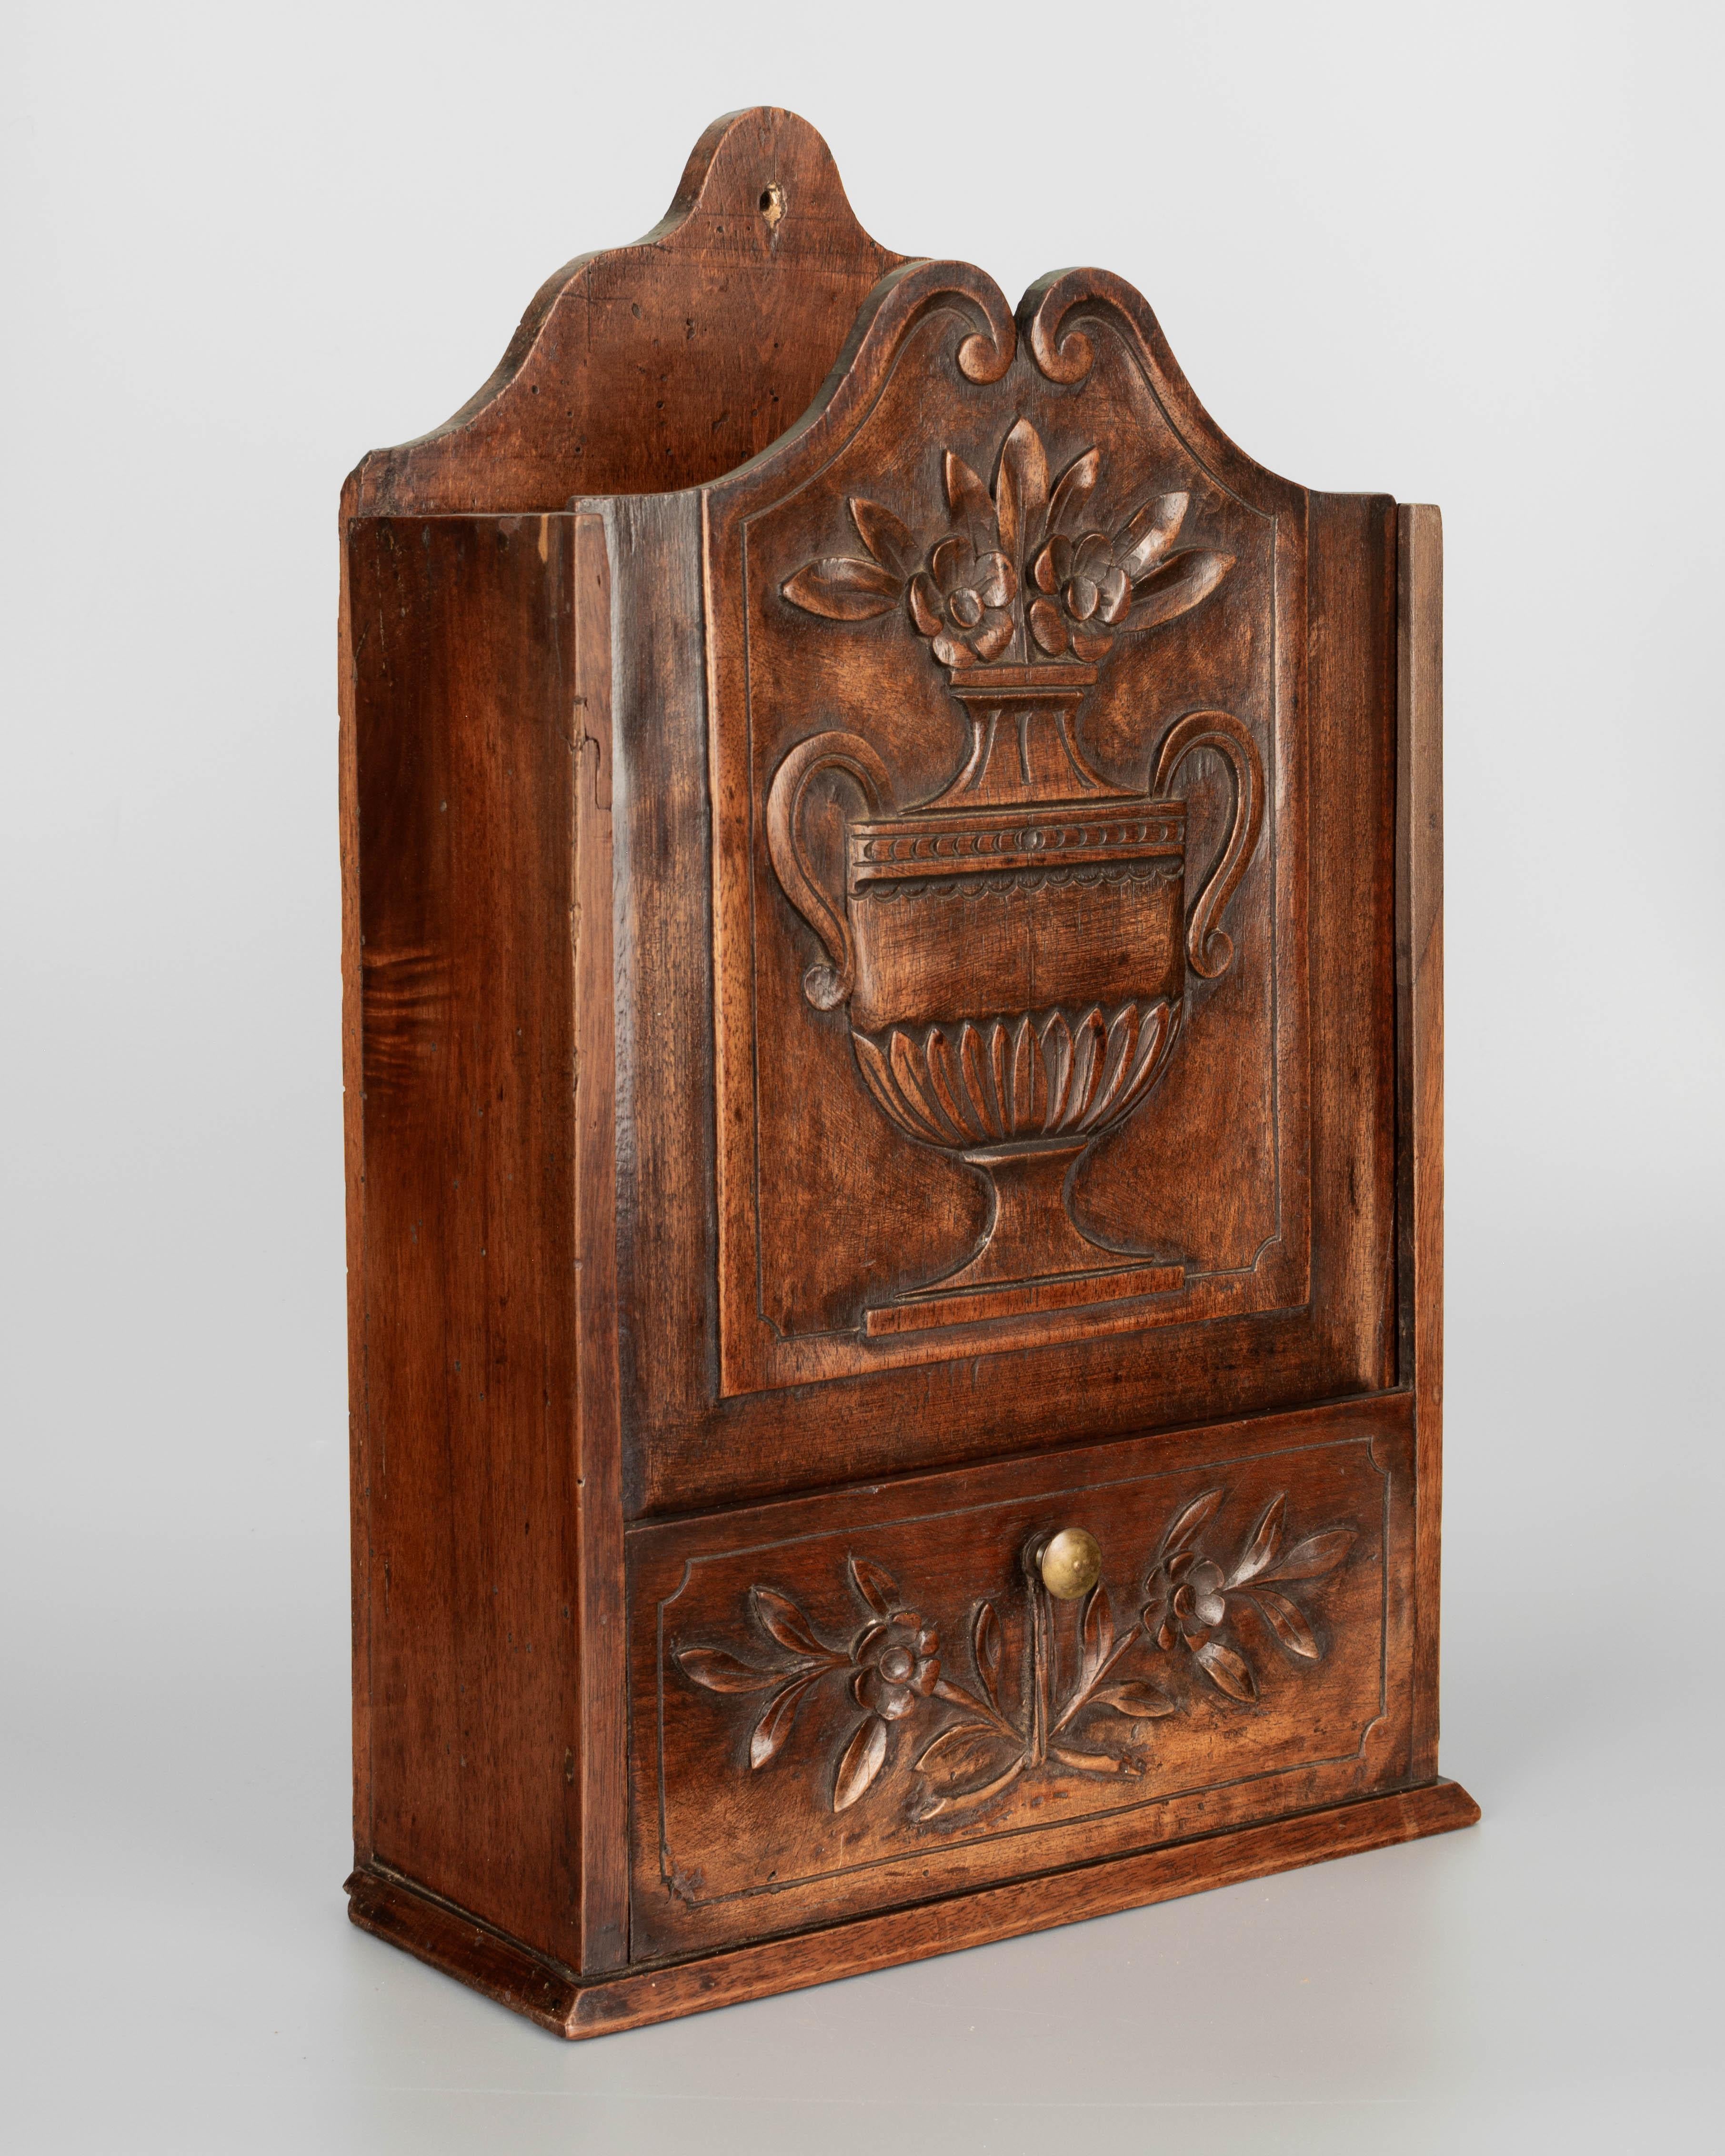 A 19th century French Provençal fariniere, or decorative box made of walnut with fine hand-carved decoration of a large flower urn. Waxed patina. This beautifully crafted household item was commonly given as a wedding gift and would be displayed on